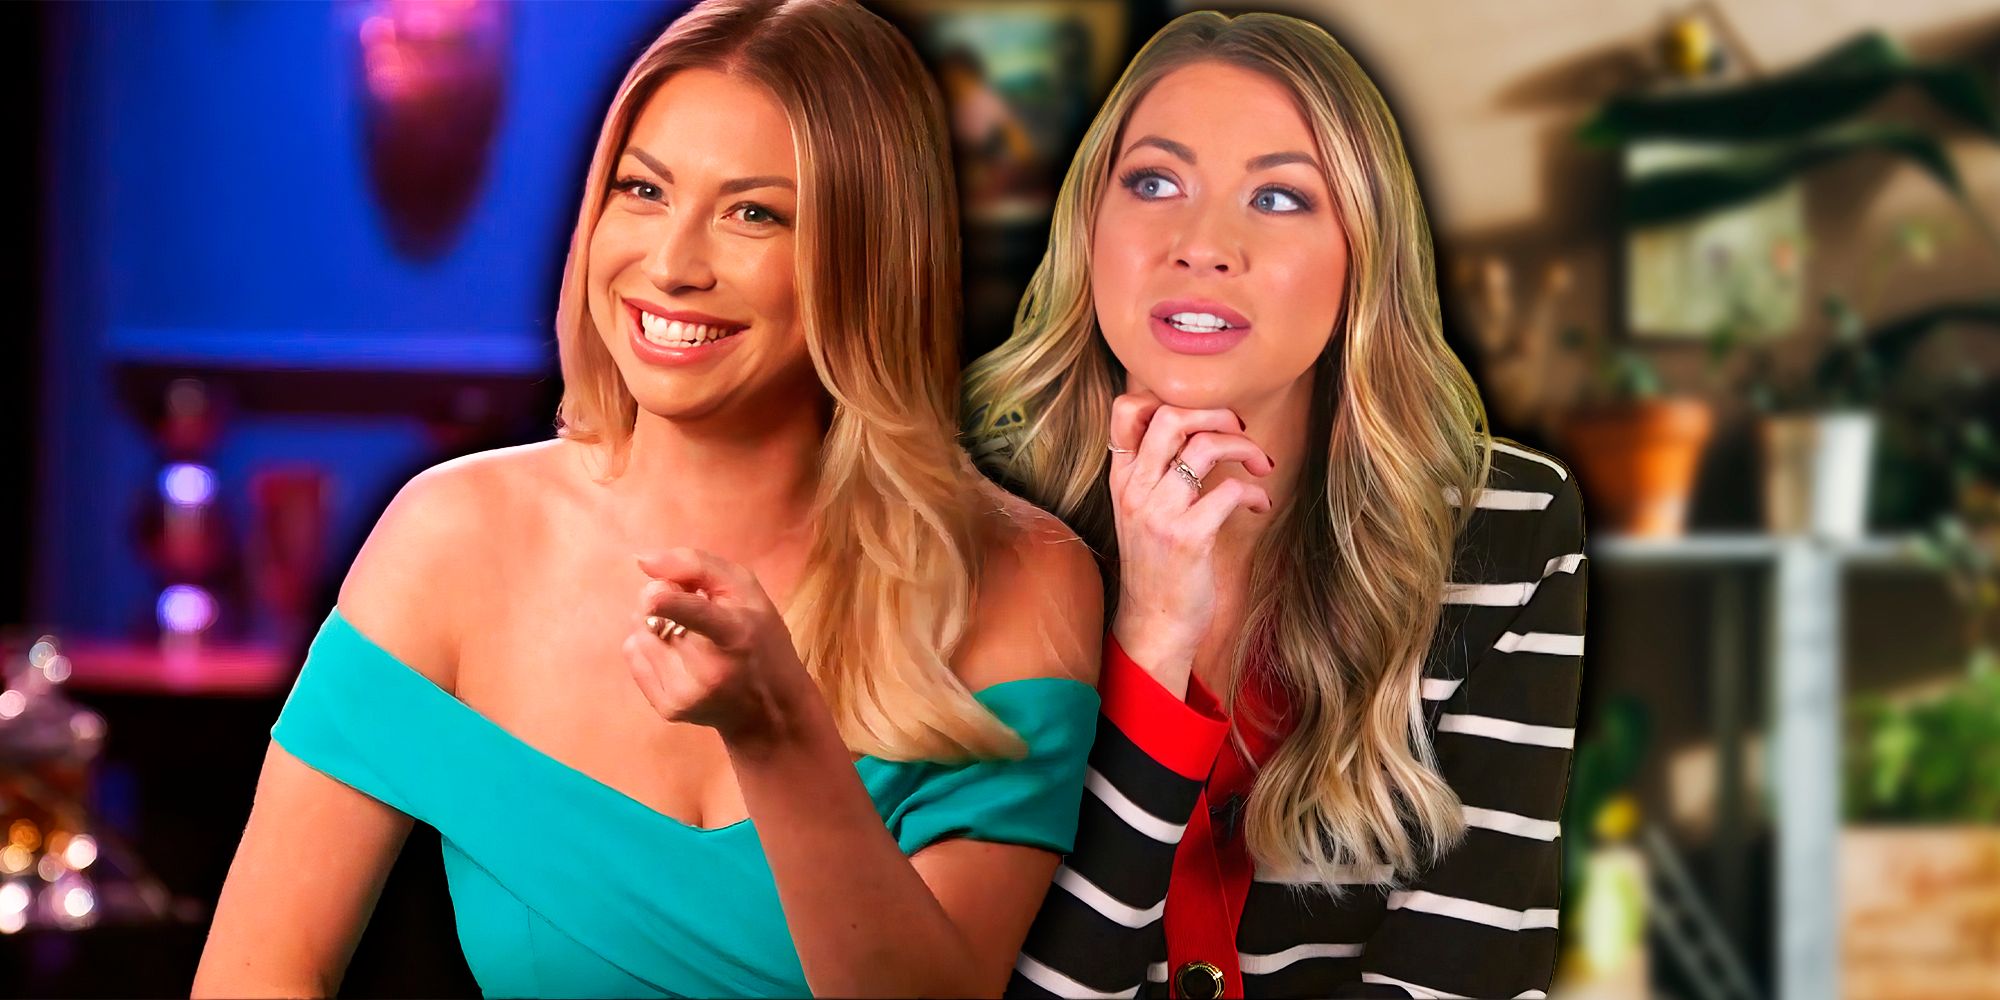 Stassi Schroeder Vanderpump Rules two images in montage showing different moods